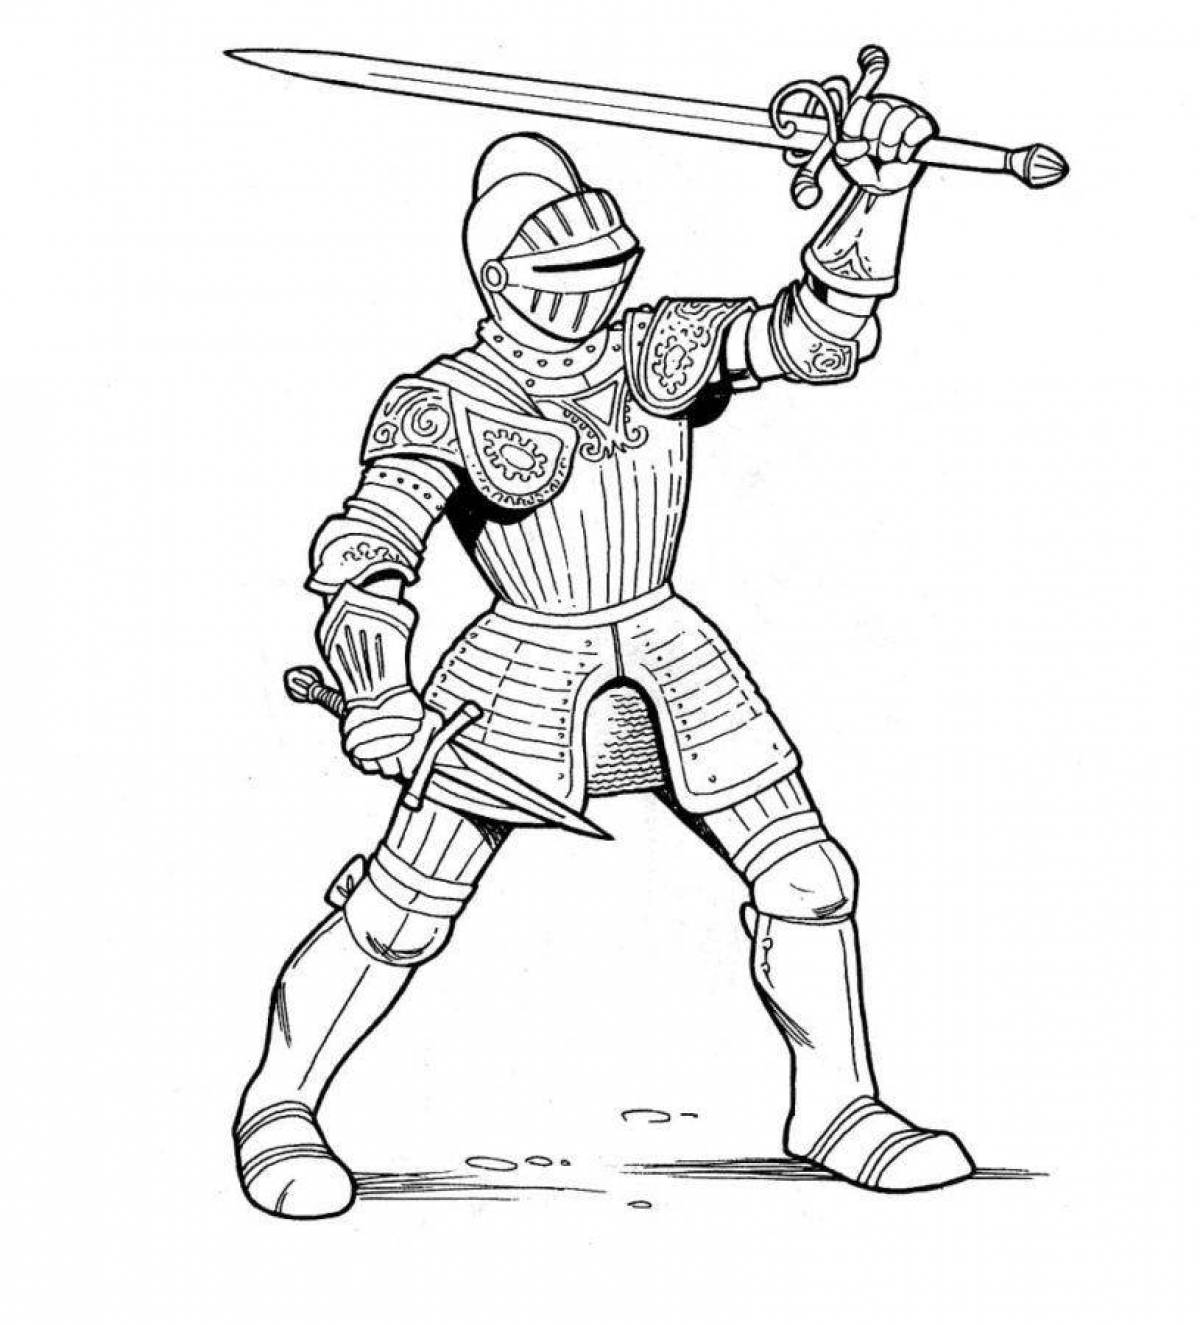 Coloring book famous medieval knights